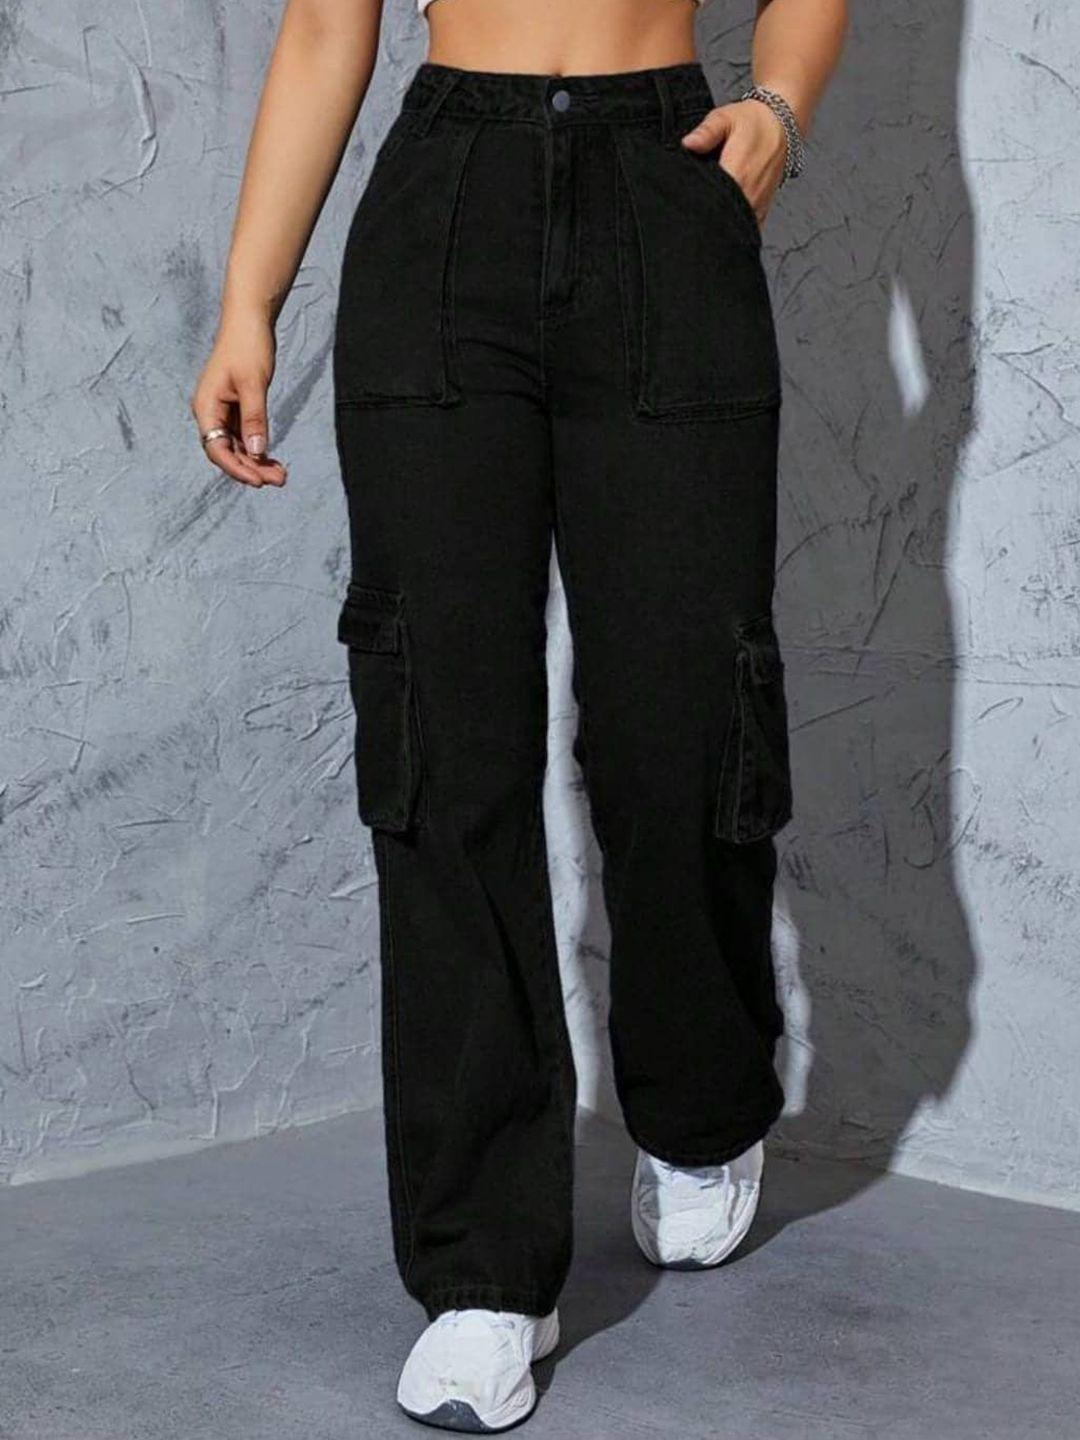 Next One Women Black Smart Wide Leg High-Rise Highly Distressed Stretchable Jeans